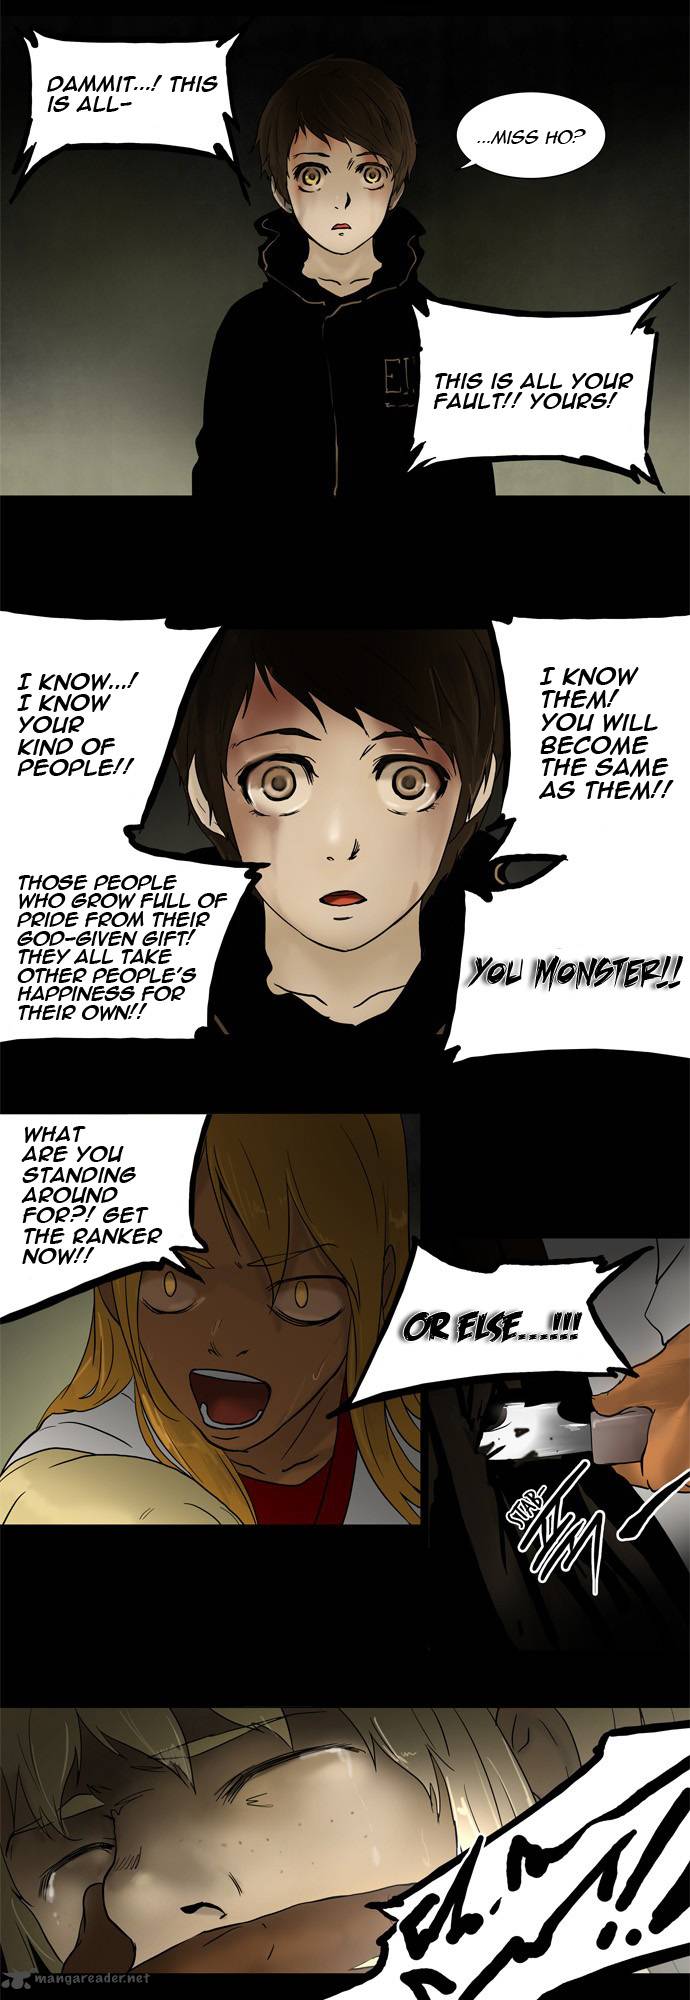 Tower Of God 48 33